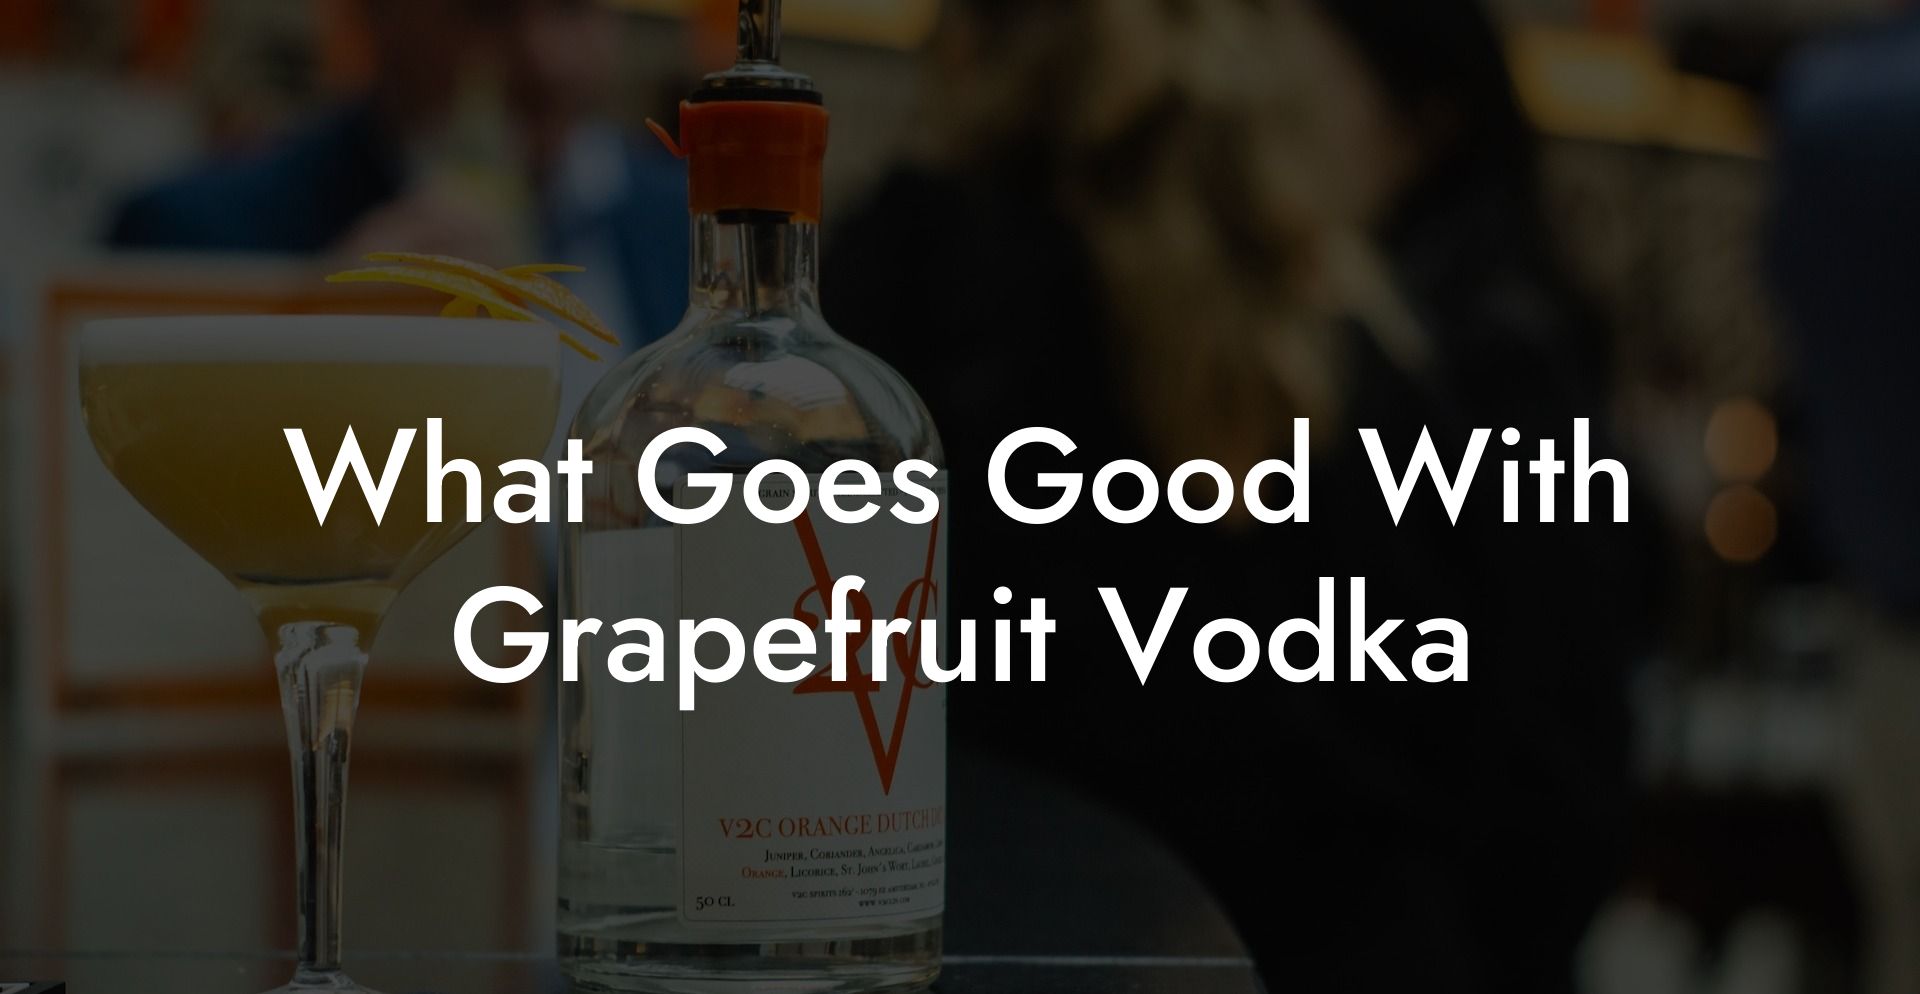 What Goes Good With Grapefruit Vodka